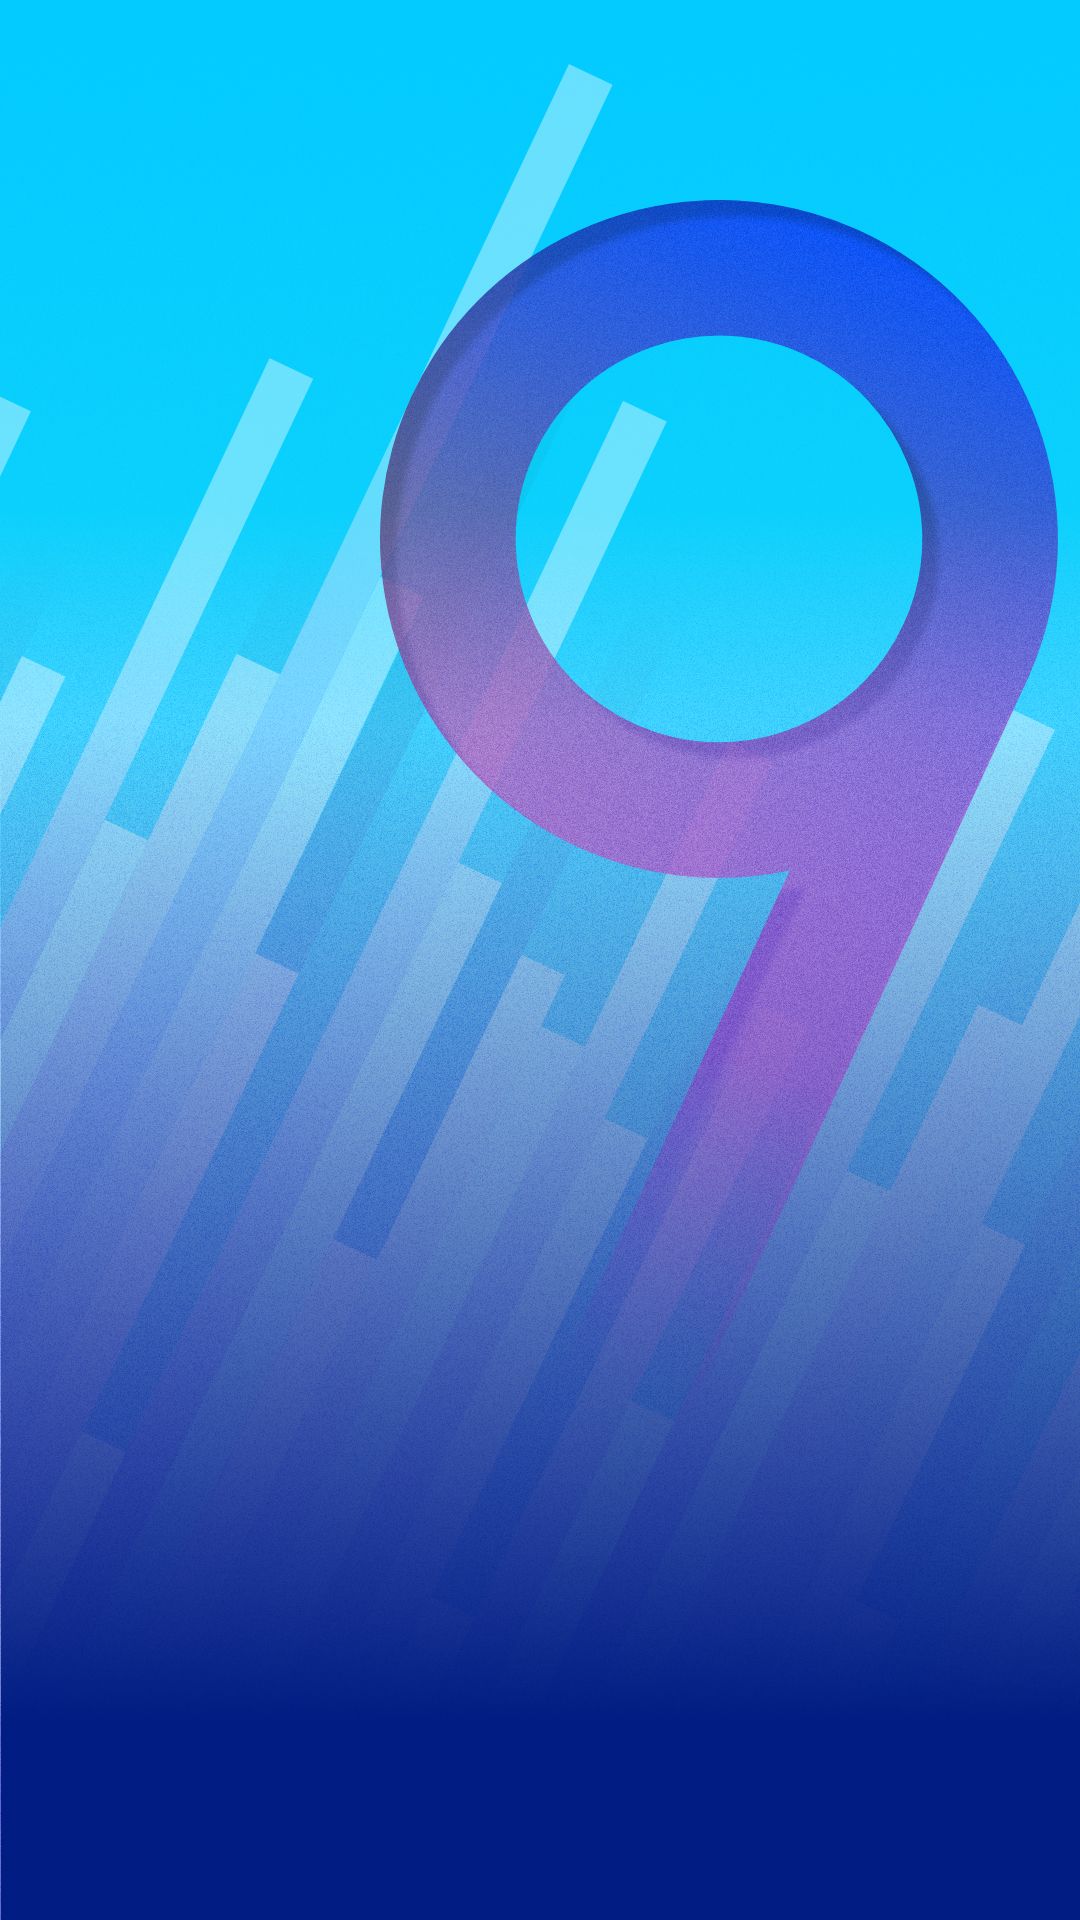 Download Latest MIUI 9 Stock WallpapersOfficial MIUI 9